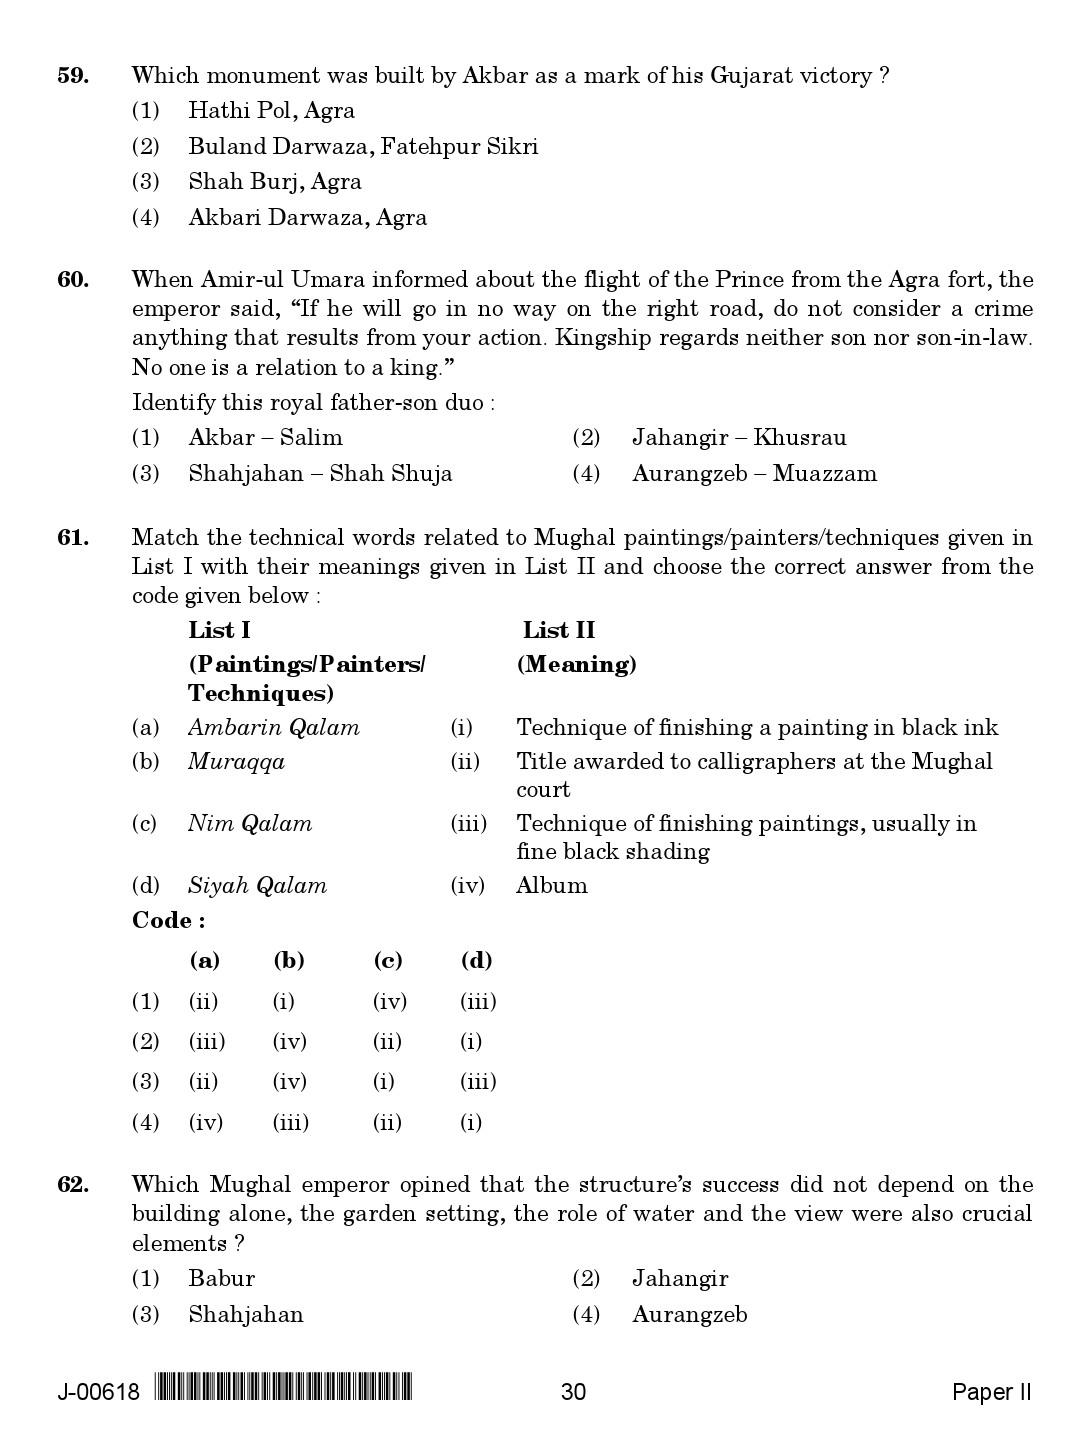 History Question Paper II July 2018 in English 2nd Exam 16